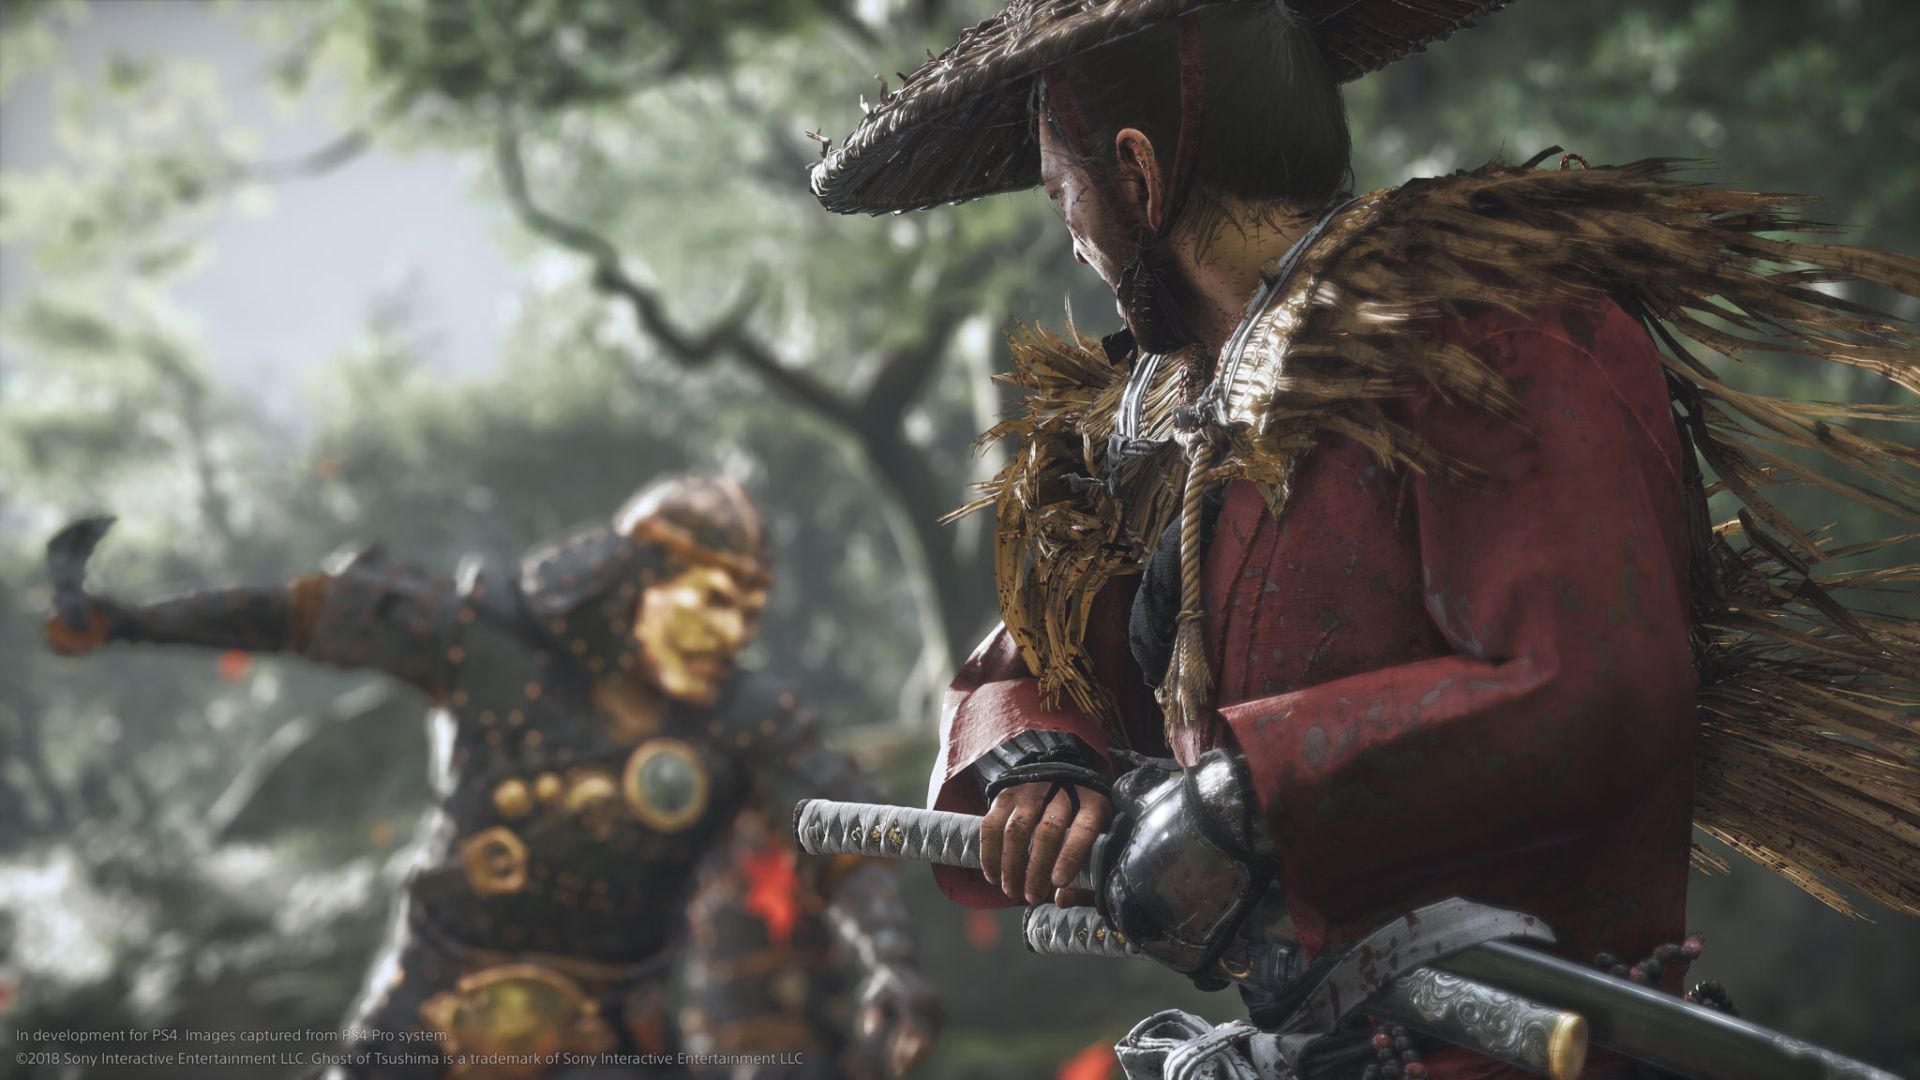 Image for Despite being part of Sony's TGS 2019 line-up, we're not actually getting new Ghost of Tsushima footage